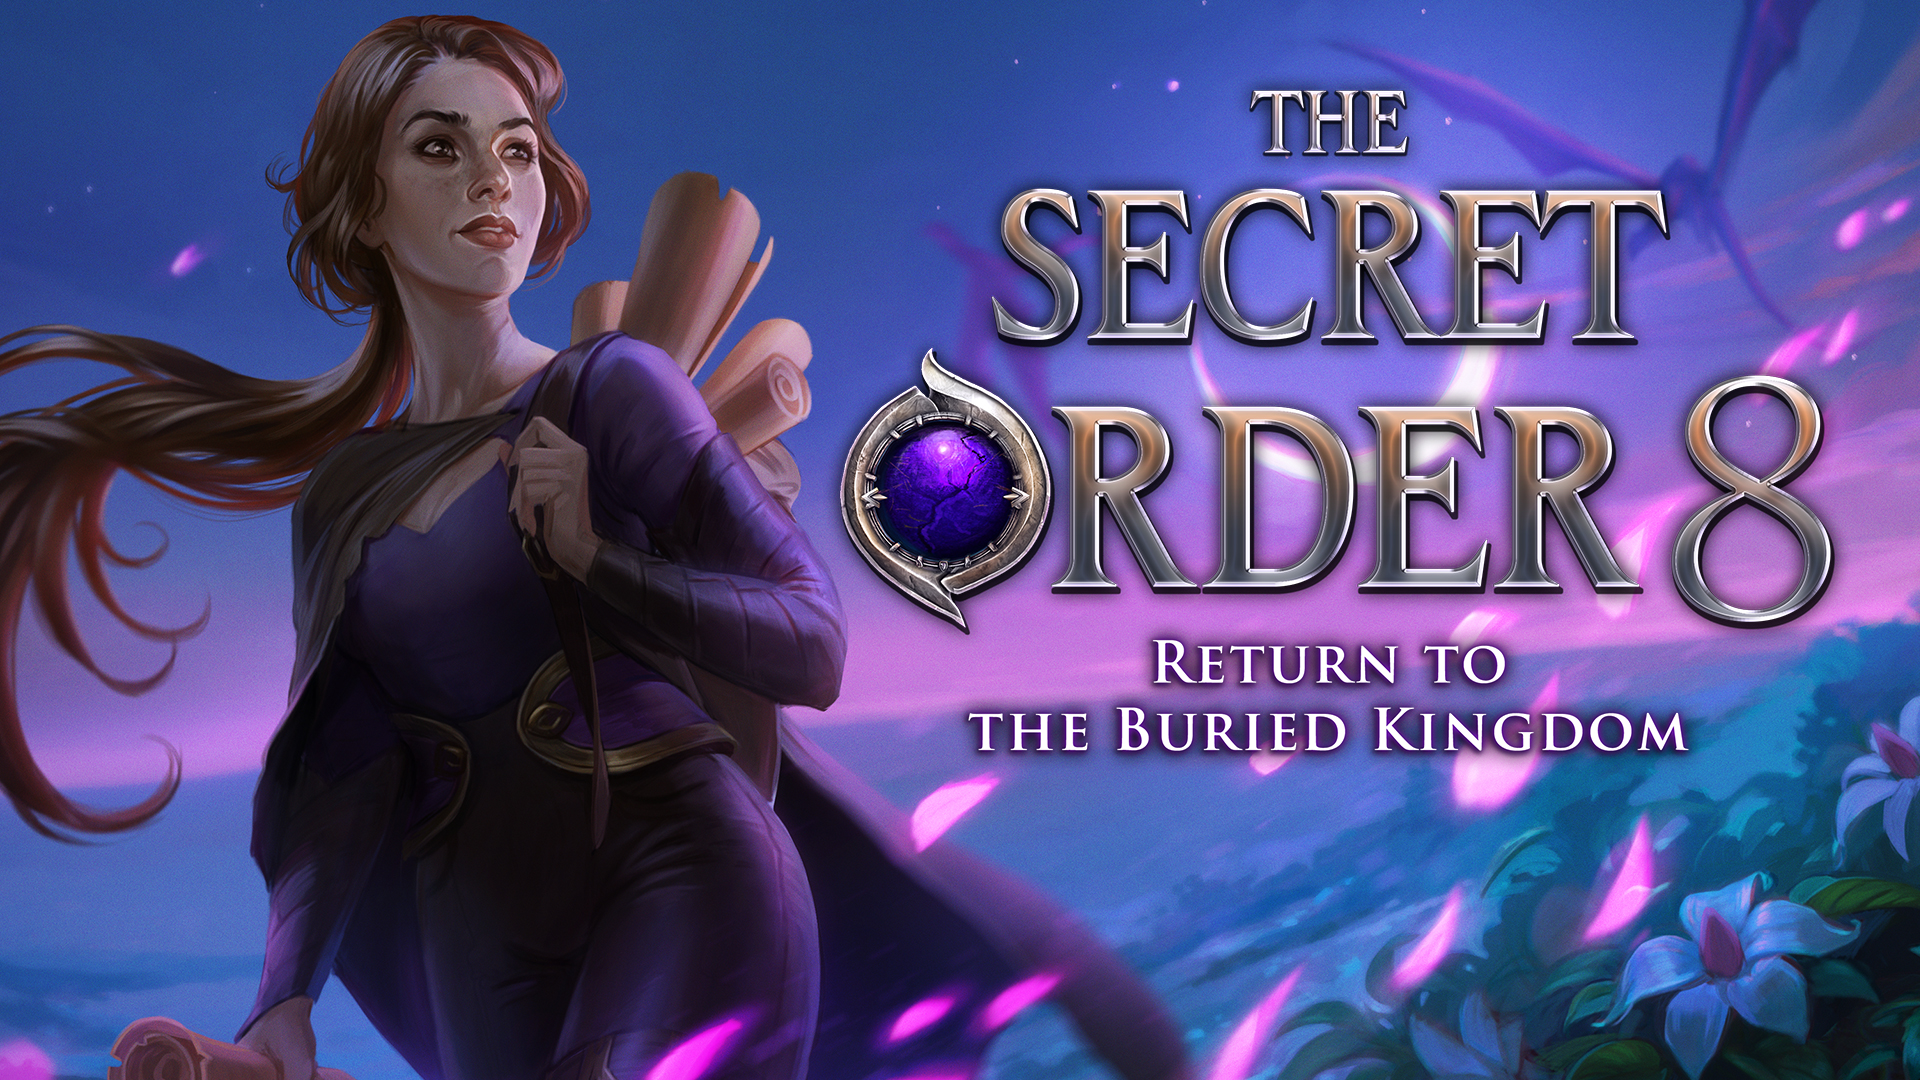 for ios download The Secret Order 8: Return to the Buried Kingdom